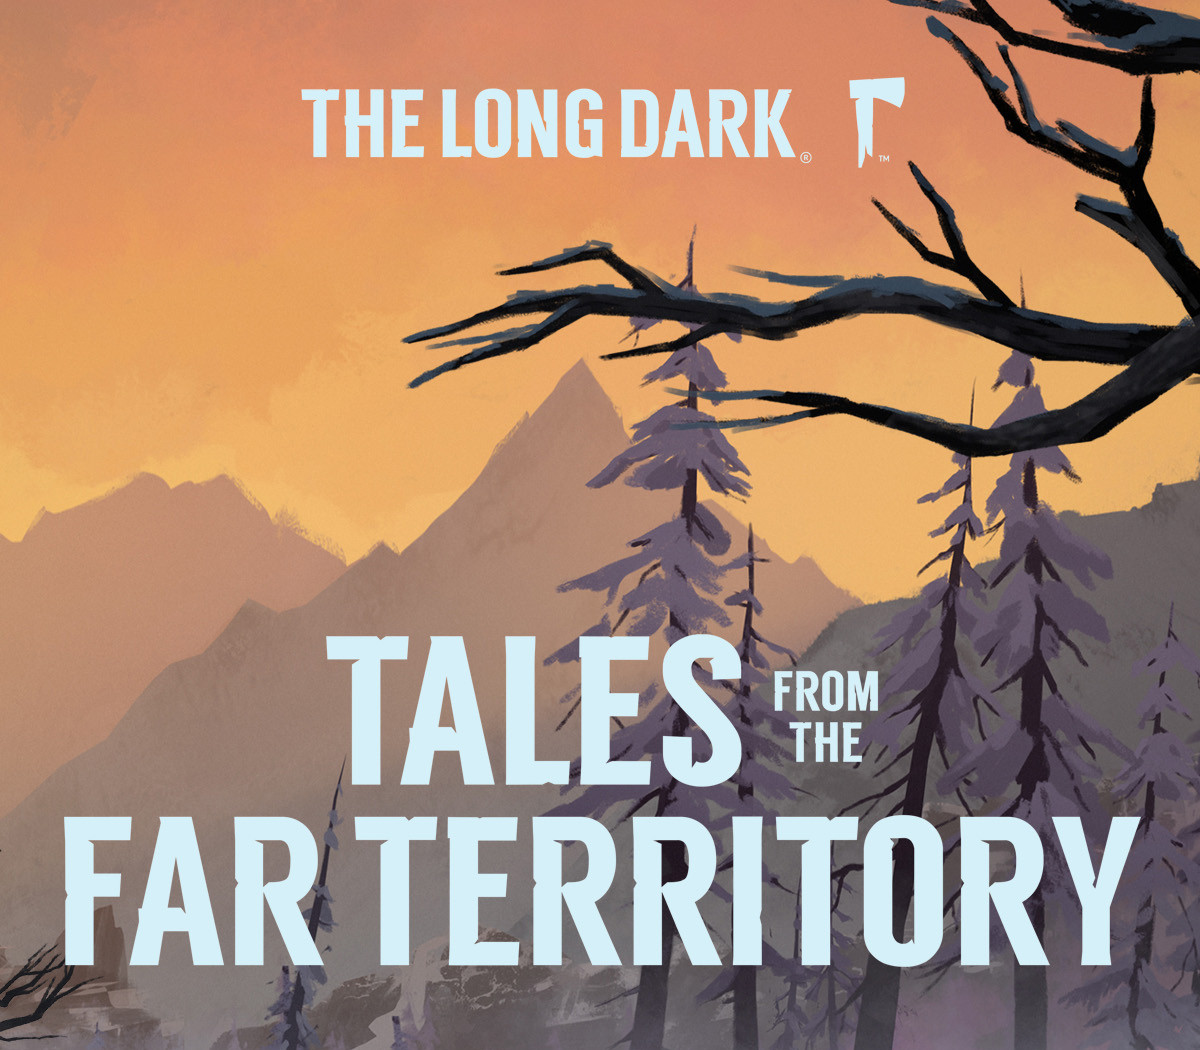 Tales from the far territory. The long Dark Tales from the far Territory карта. The long Dark Tales from the far Territory новая локация. The long Dark Tales from the far Territory как запустить. The long Dark Tales from the far Territory main menu.